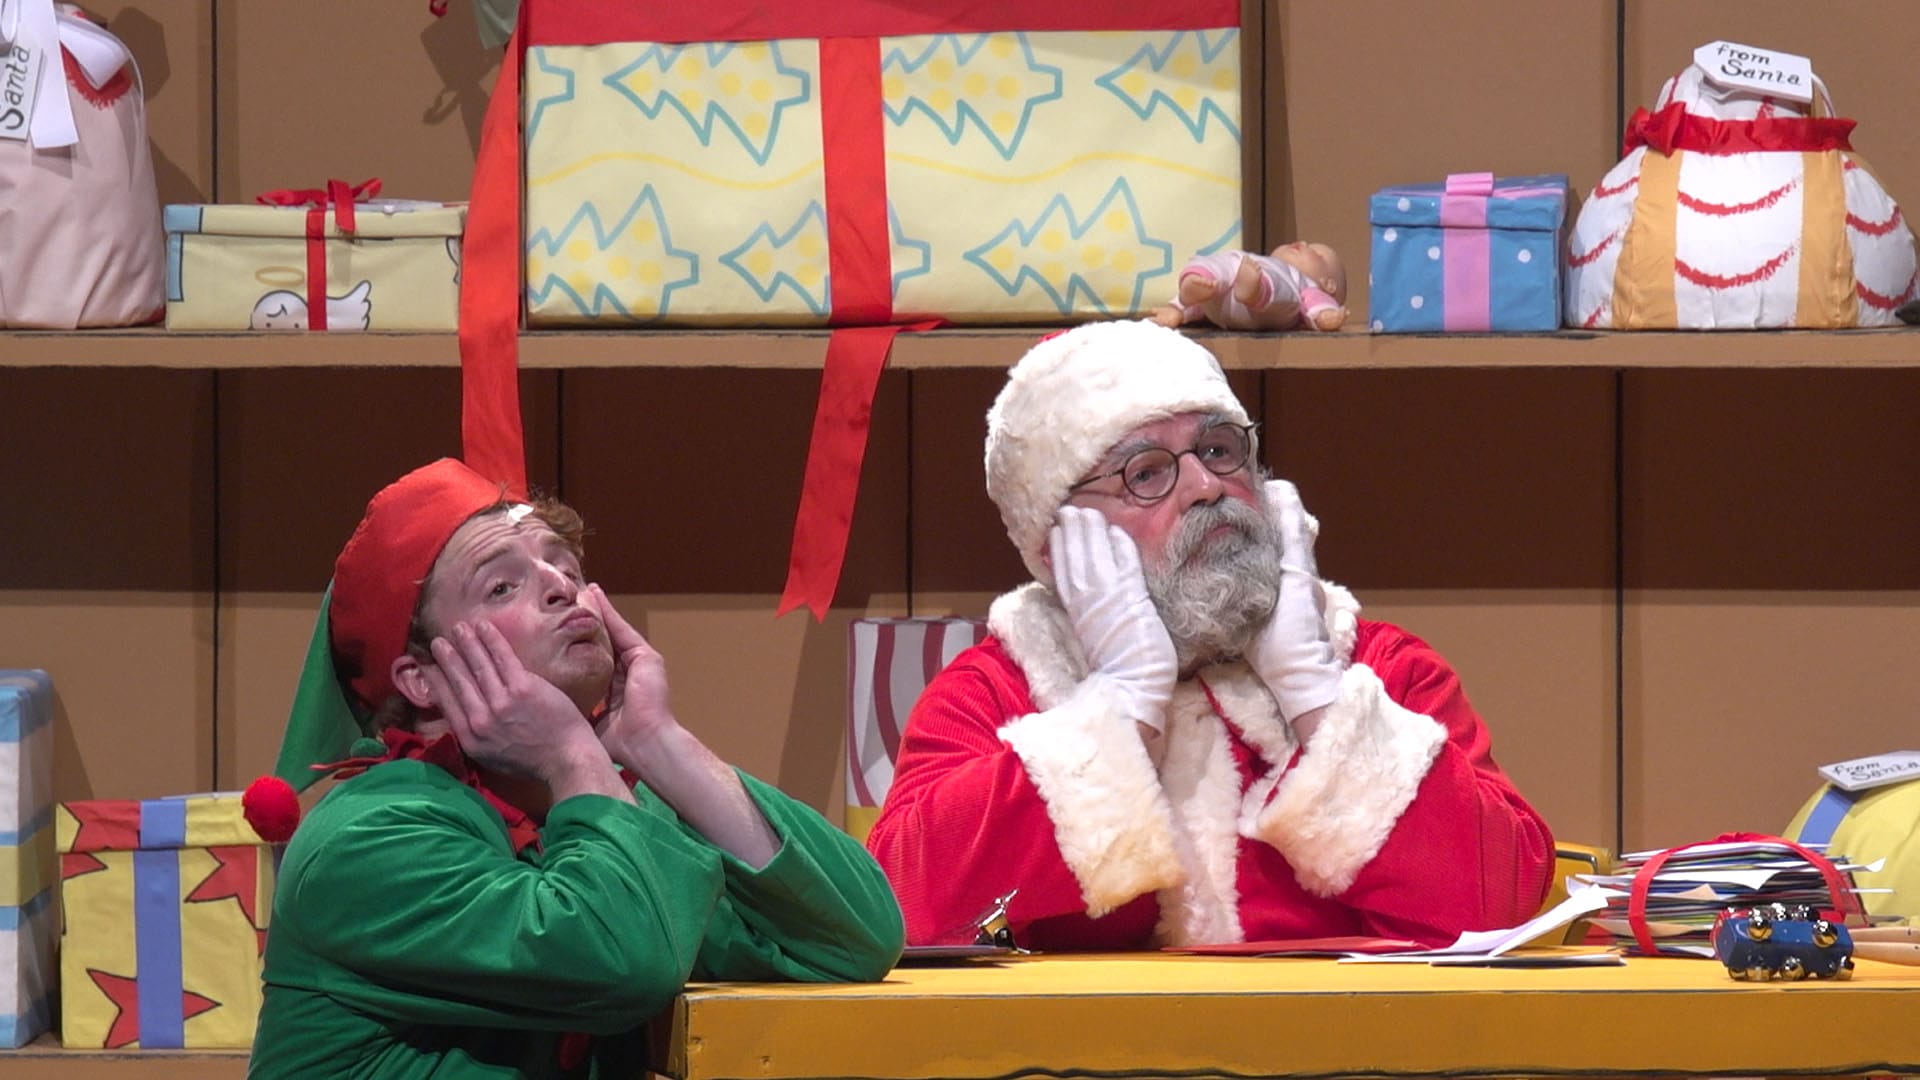 Santa and an elf sit with the heads in the hands